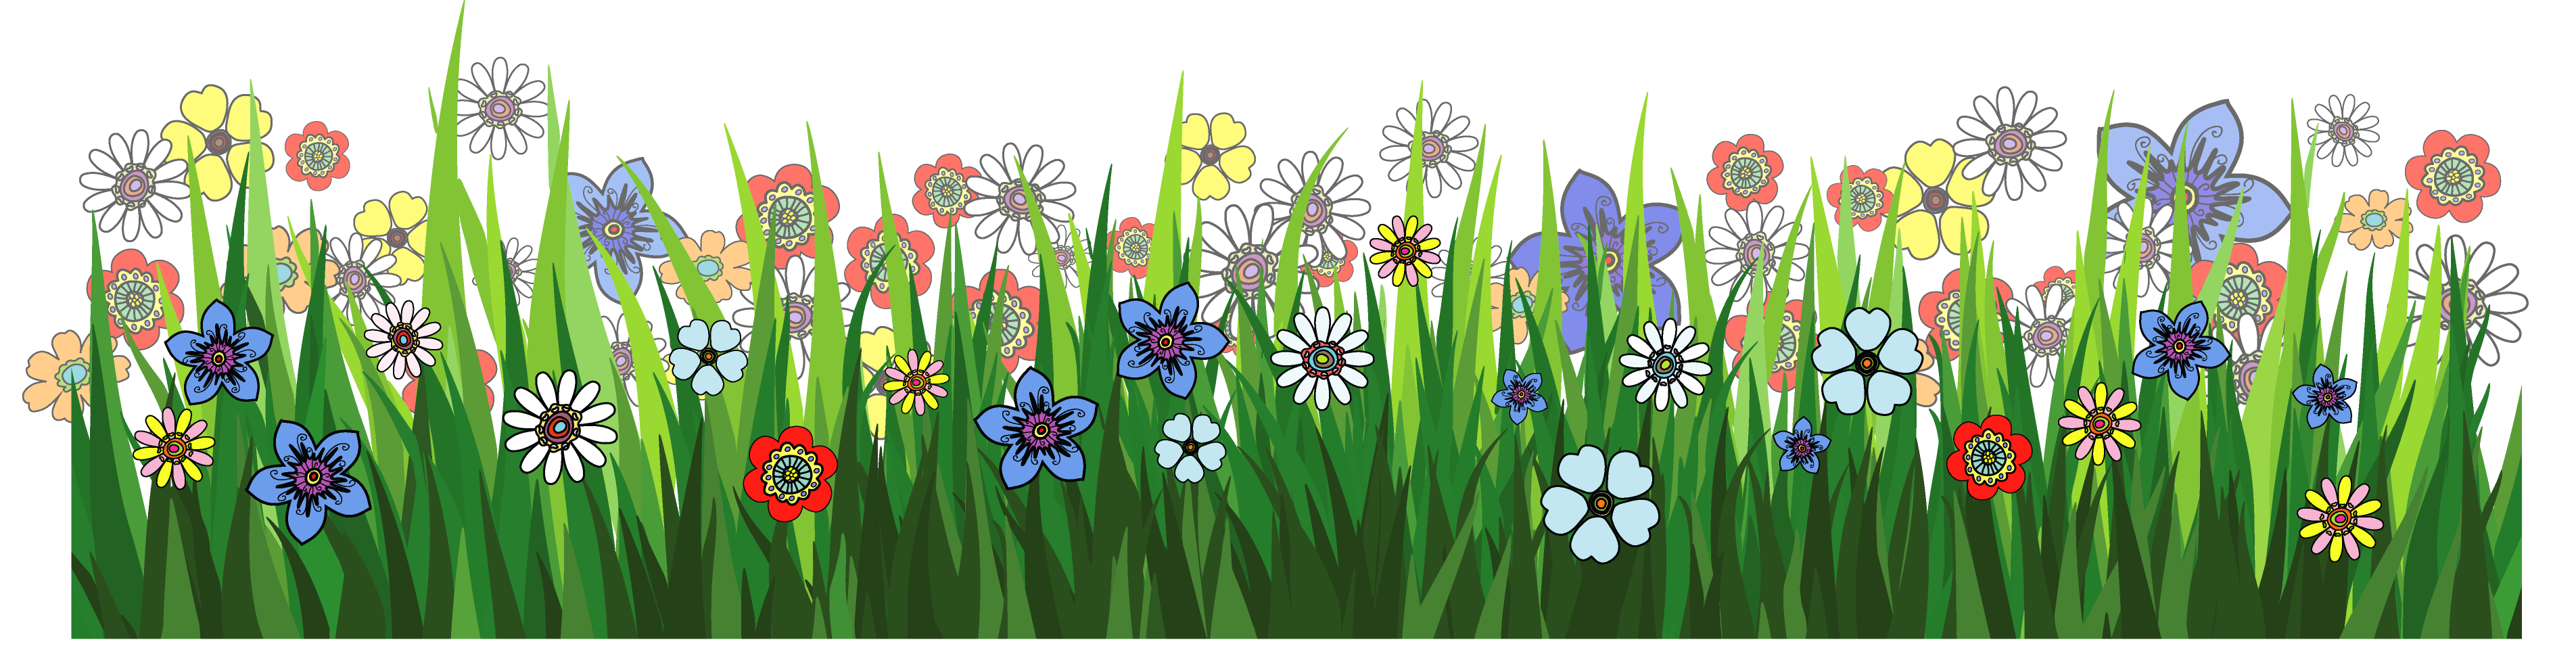 Grass Ground with Flowers PNG Picture